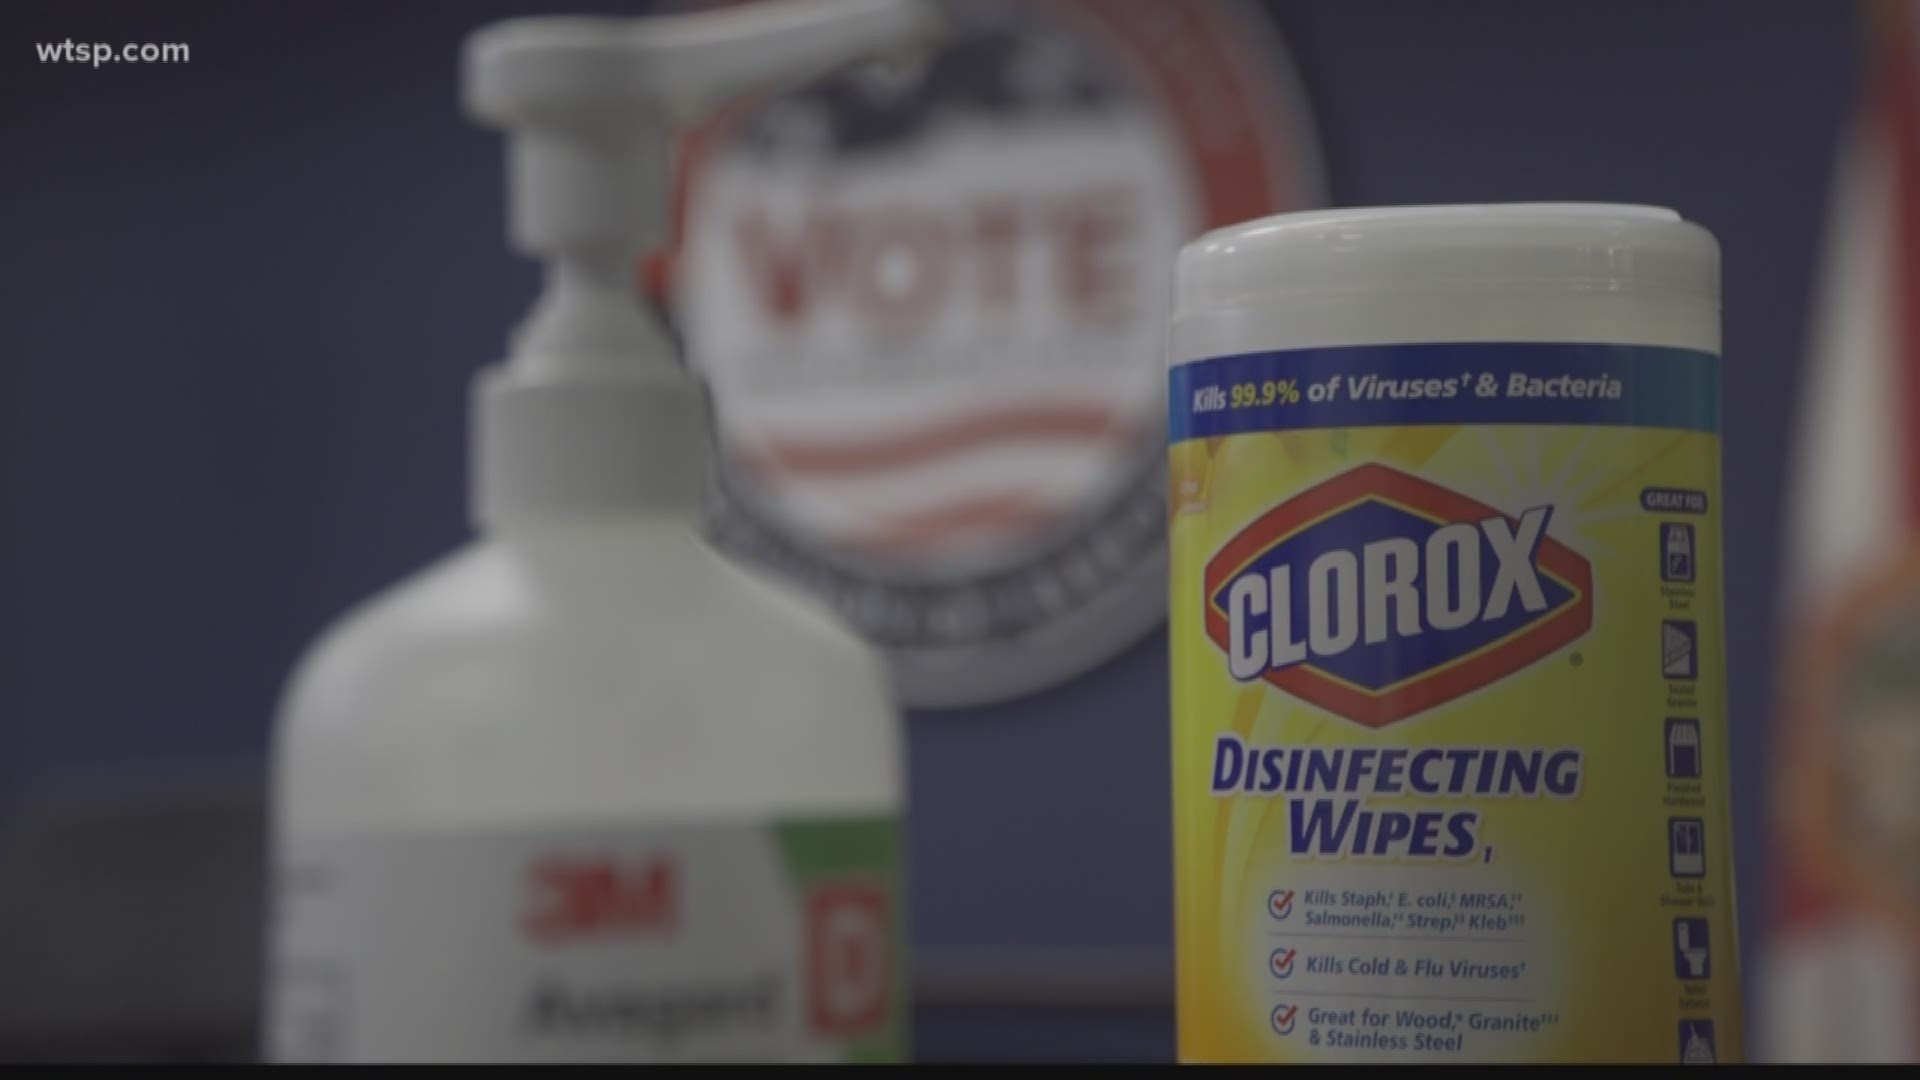 Workers have been tasked with wiping down machines, and they have added hand sanitizer for voters.